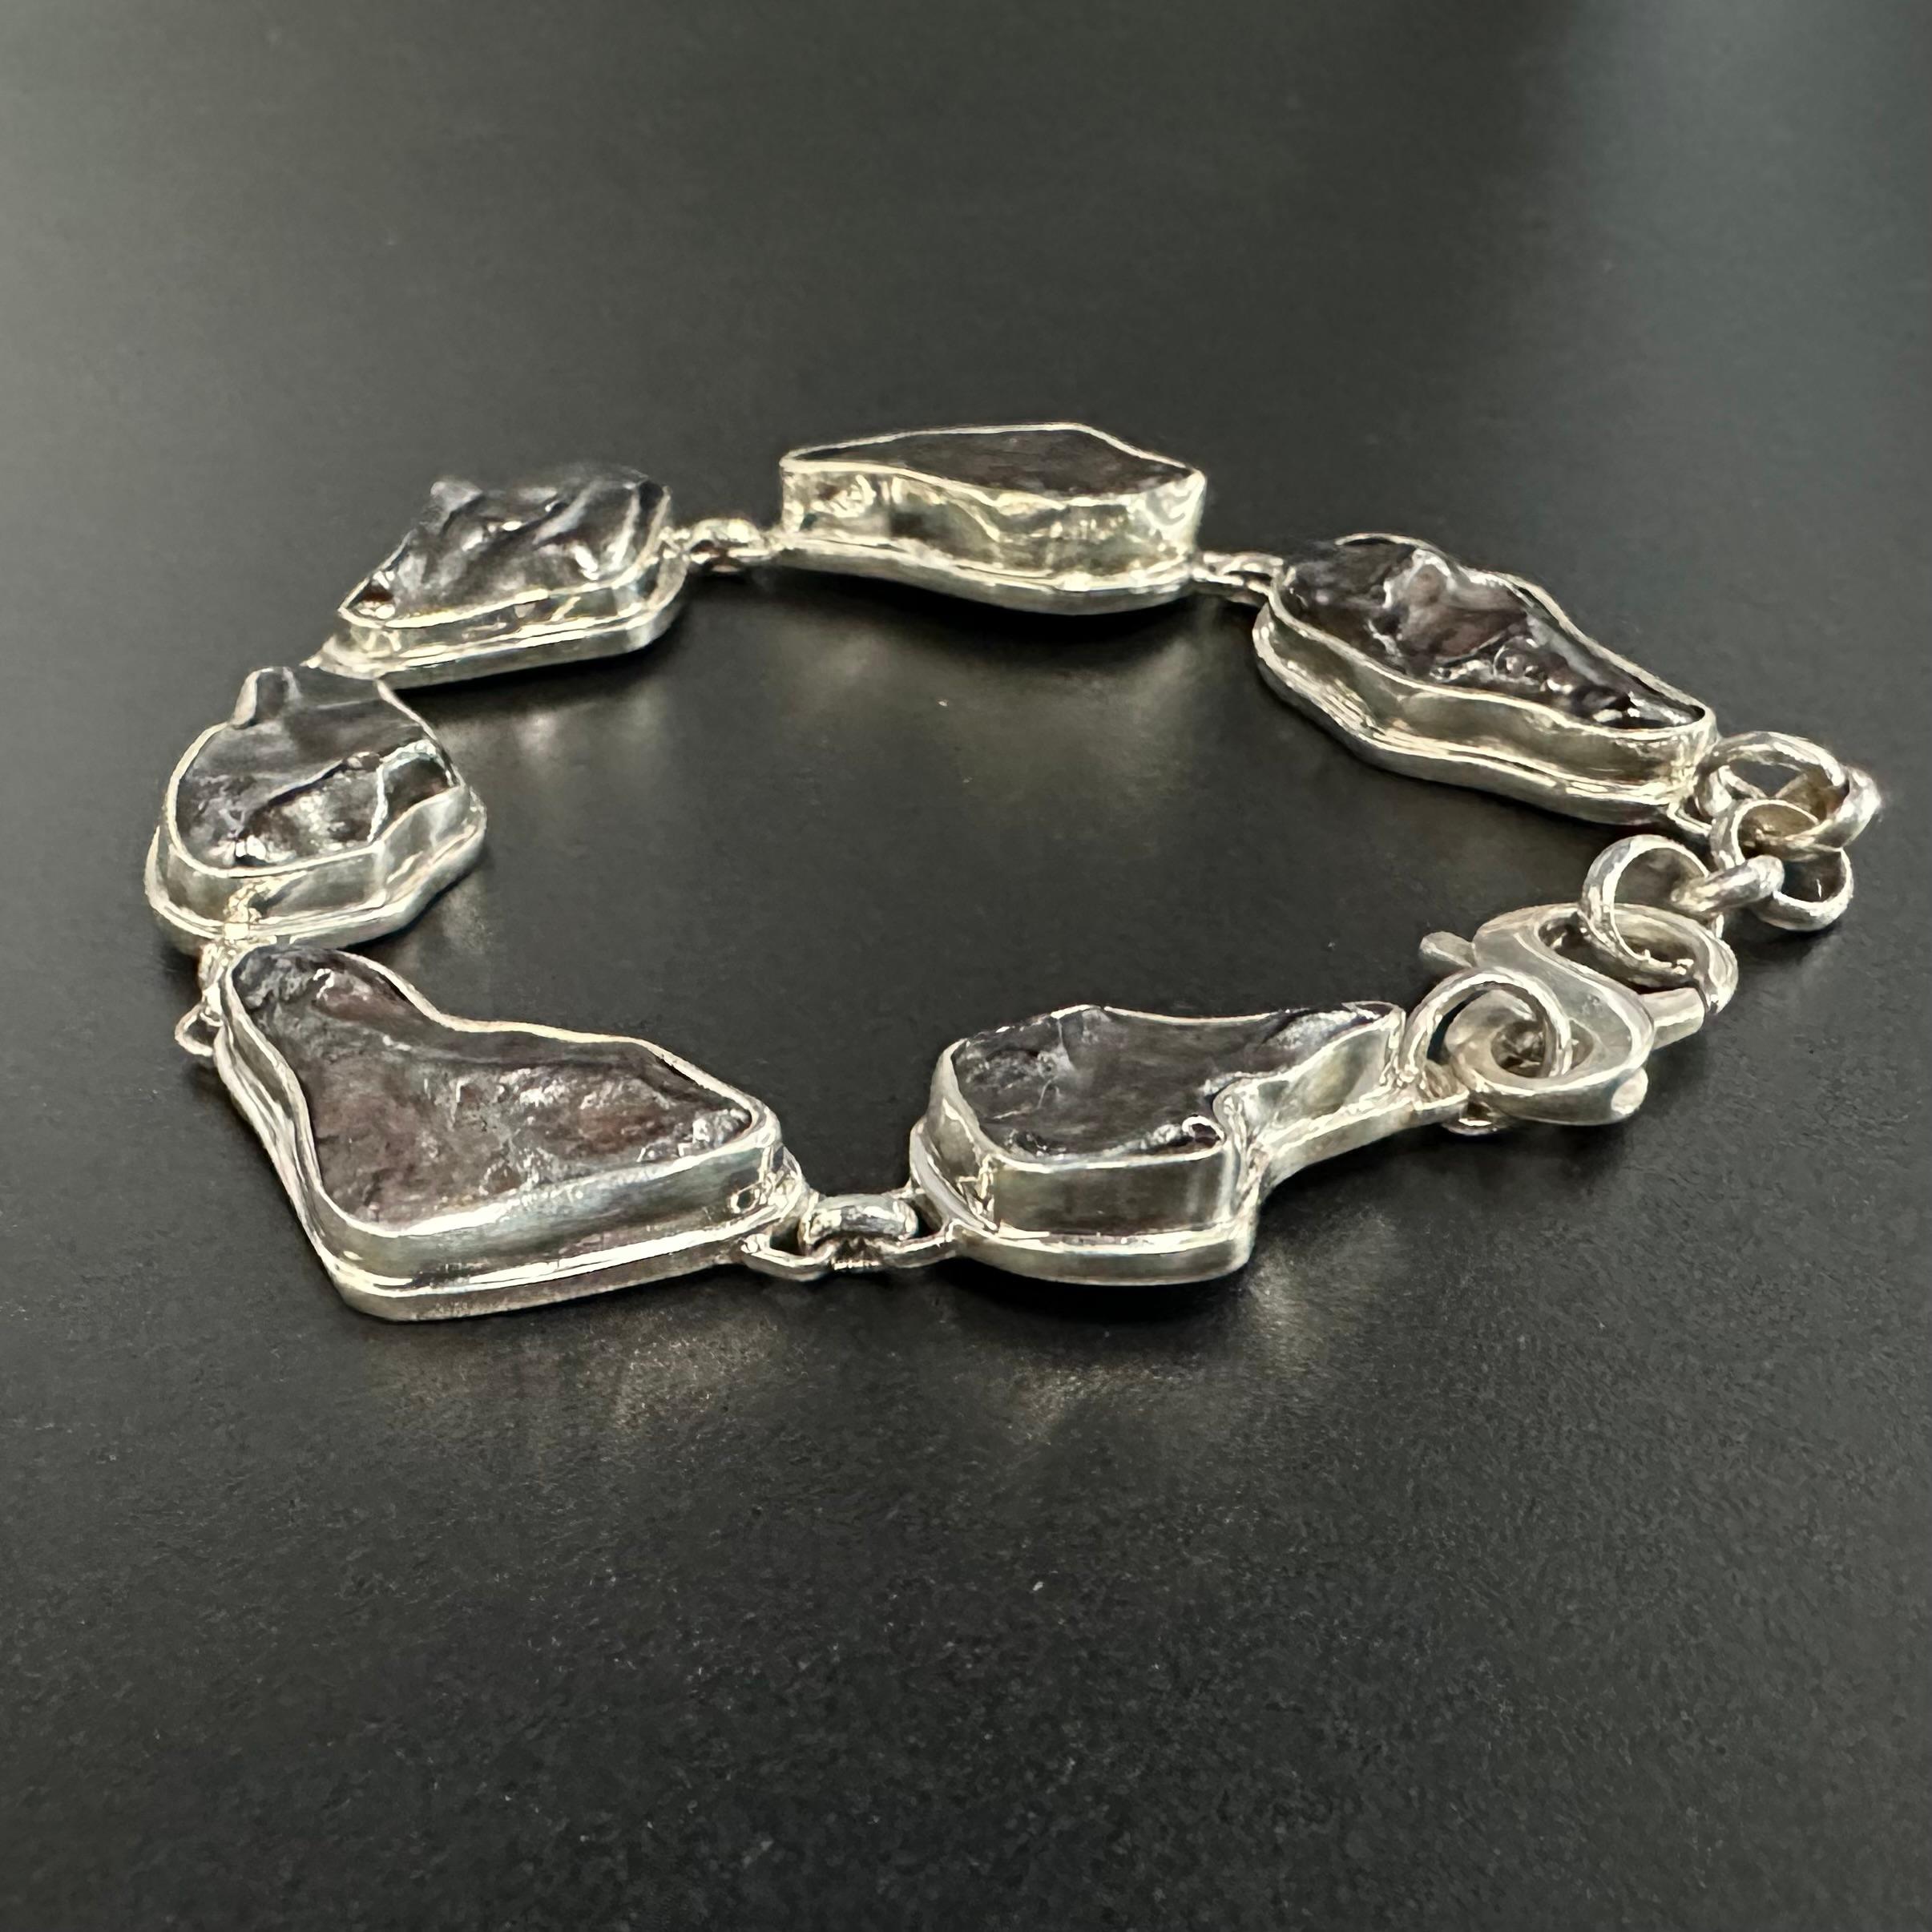 Six roughly 10 x 22 mm fragments of the Sikhote-Alin Meteorite are held in thick handmade sterling silver bezels with double bezel accents below, and linked, to create this unique 